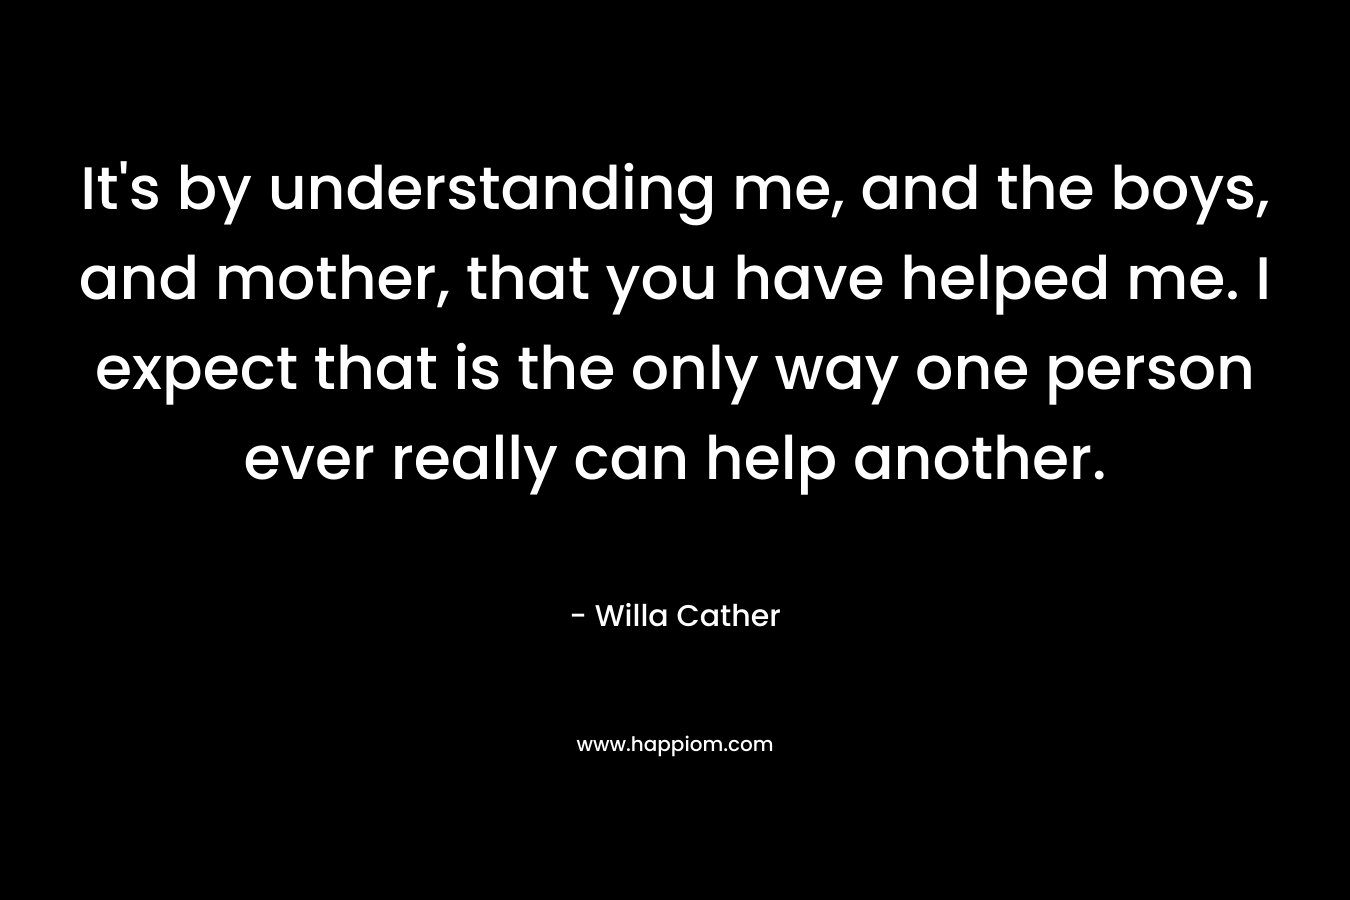 It’s by understanding me, and the boys, and mother, that you have helped me. I expect that is the only way one person ever really can help another. – Willa Cather